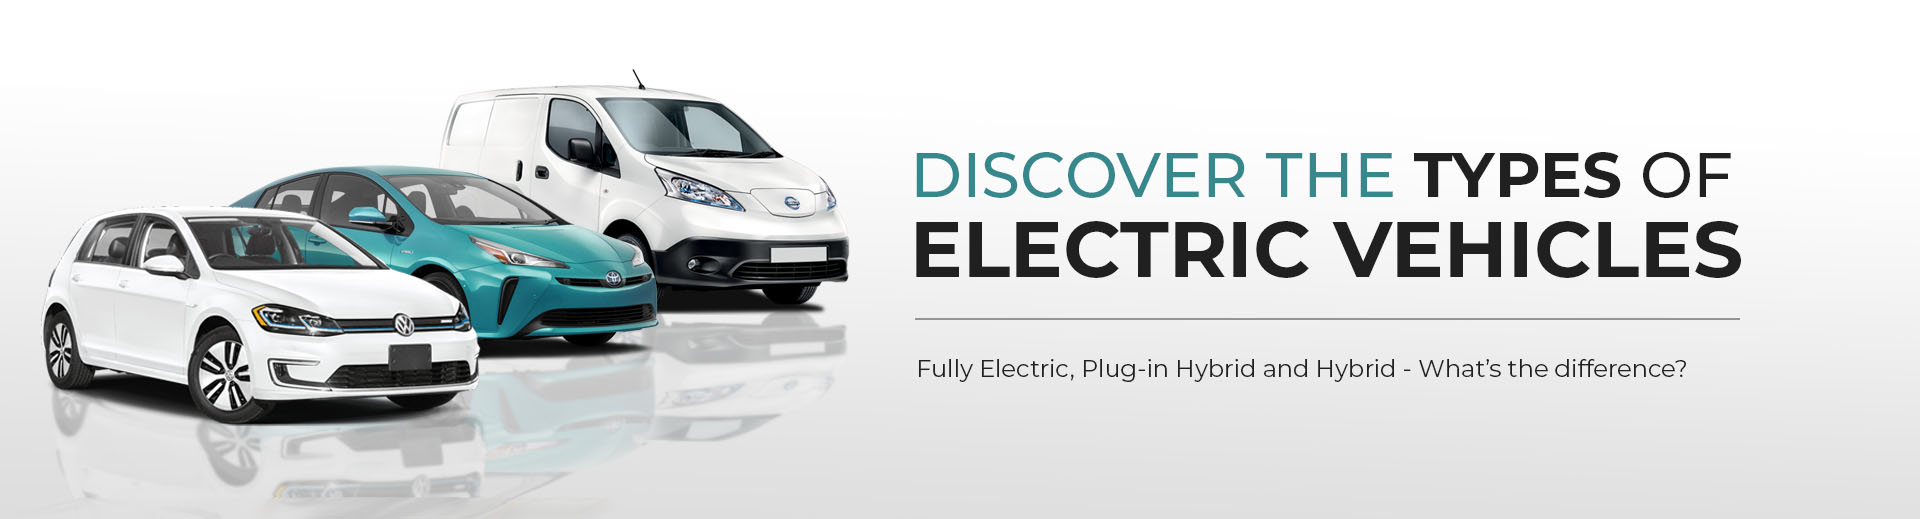 Discover the Types of Electric Vehicles